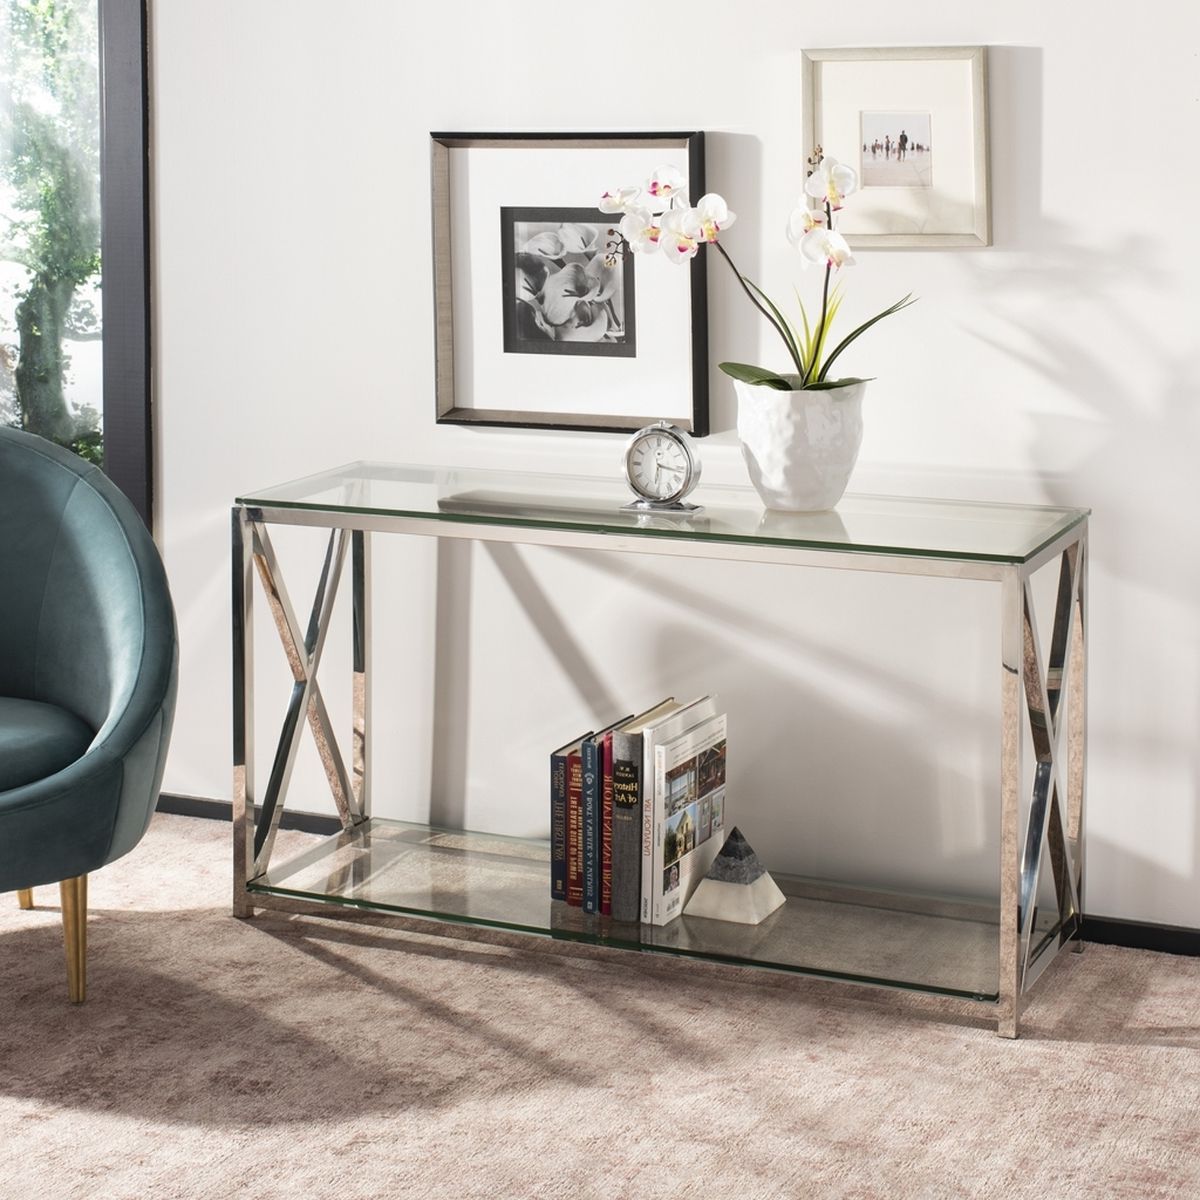 Chrome And Glass Rectangular Console Tables In Famous Stainless Steel Chrome + Glass Console Table – Safavieh (View 1 of 10)